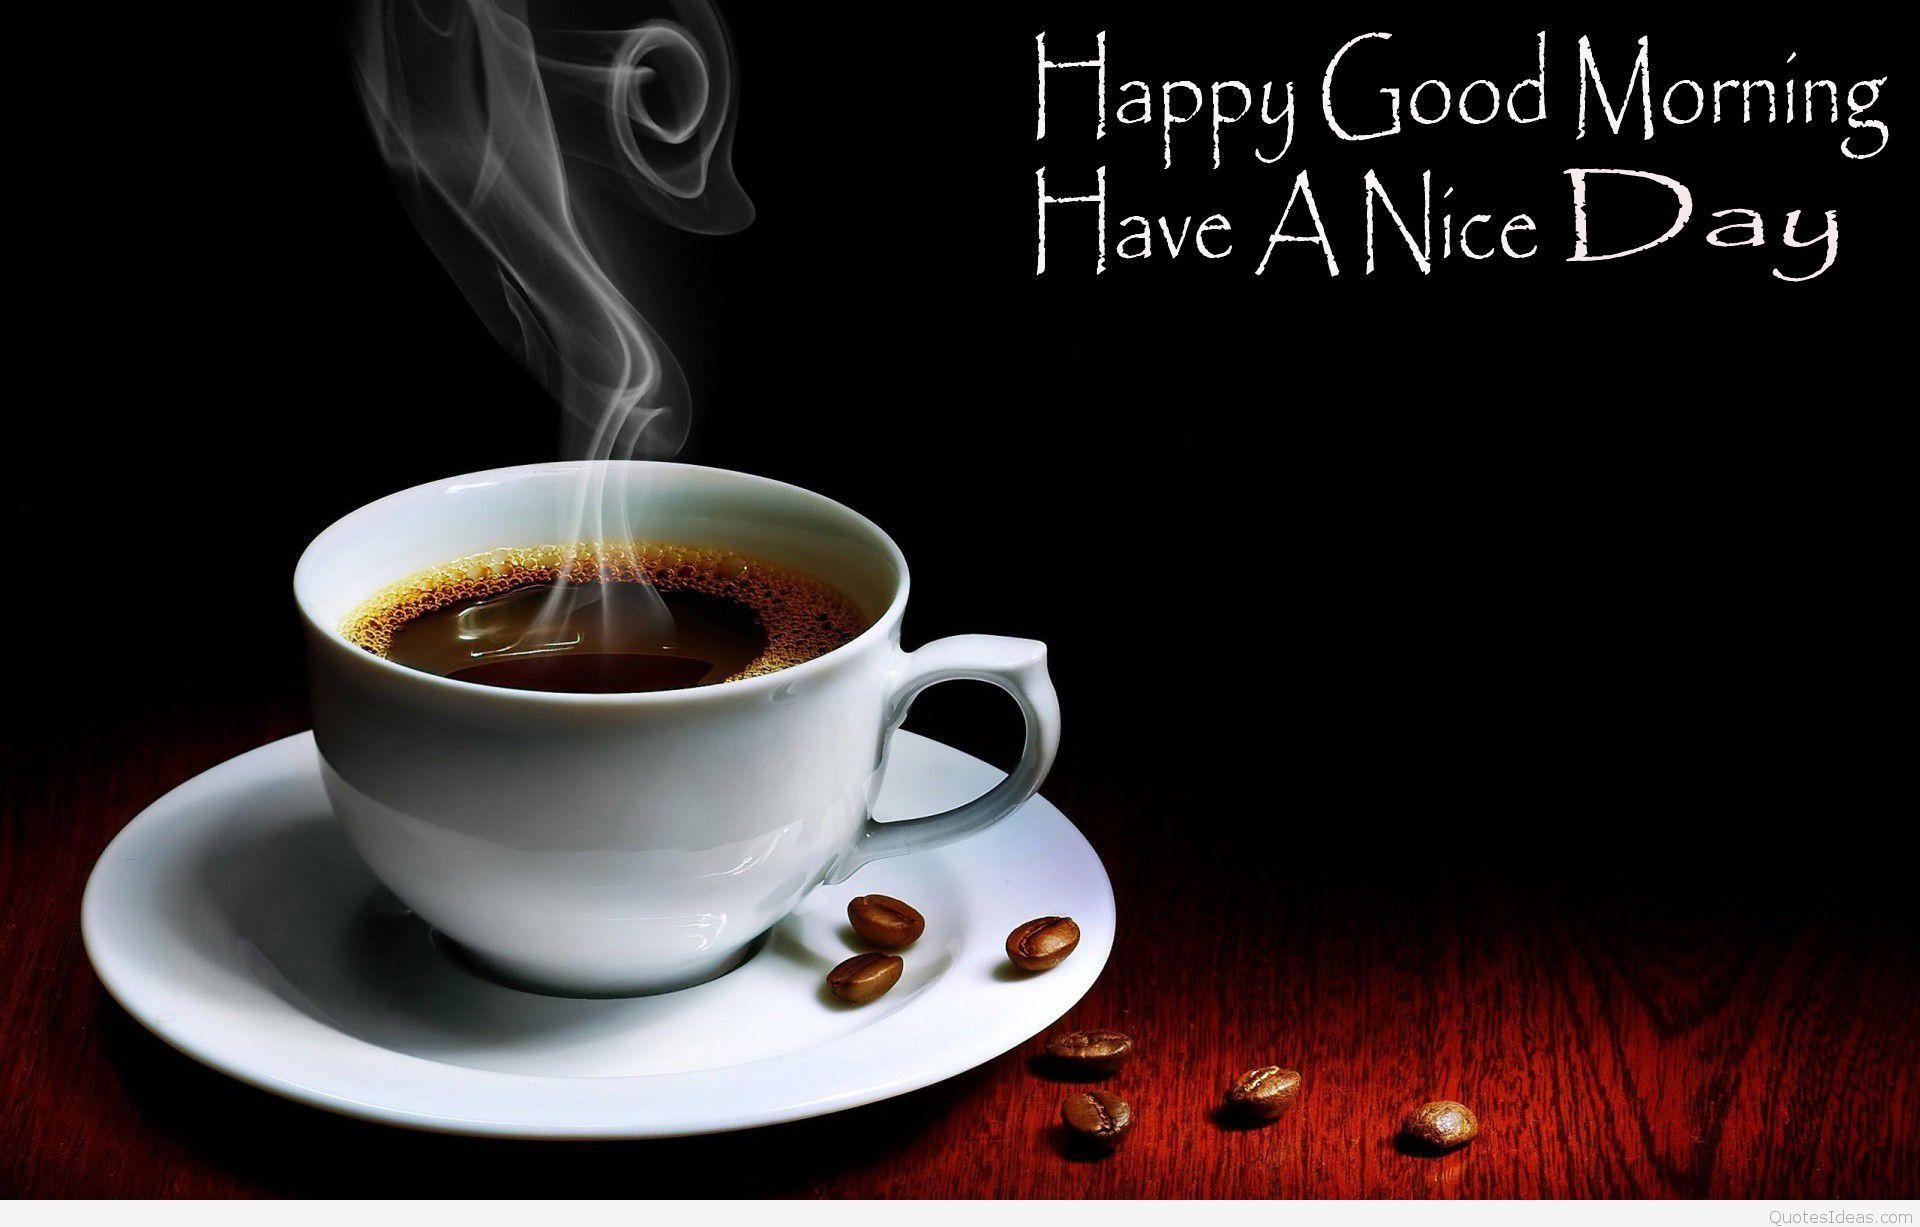 Good morning coffee cup wallpaper quotes messages. All